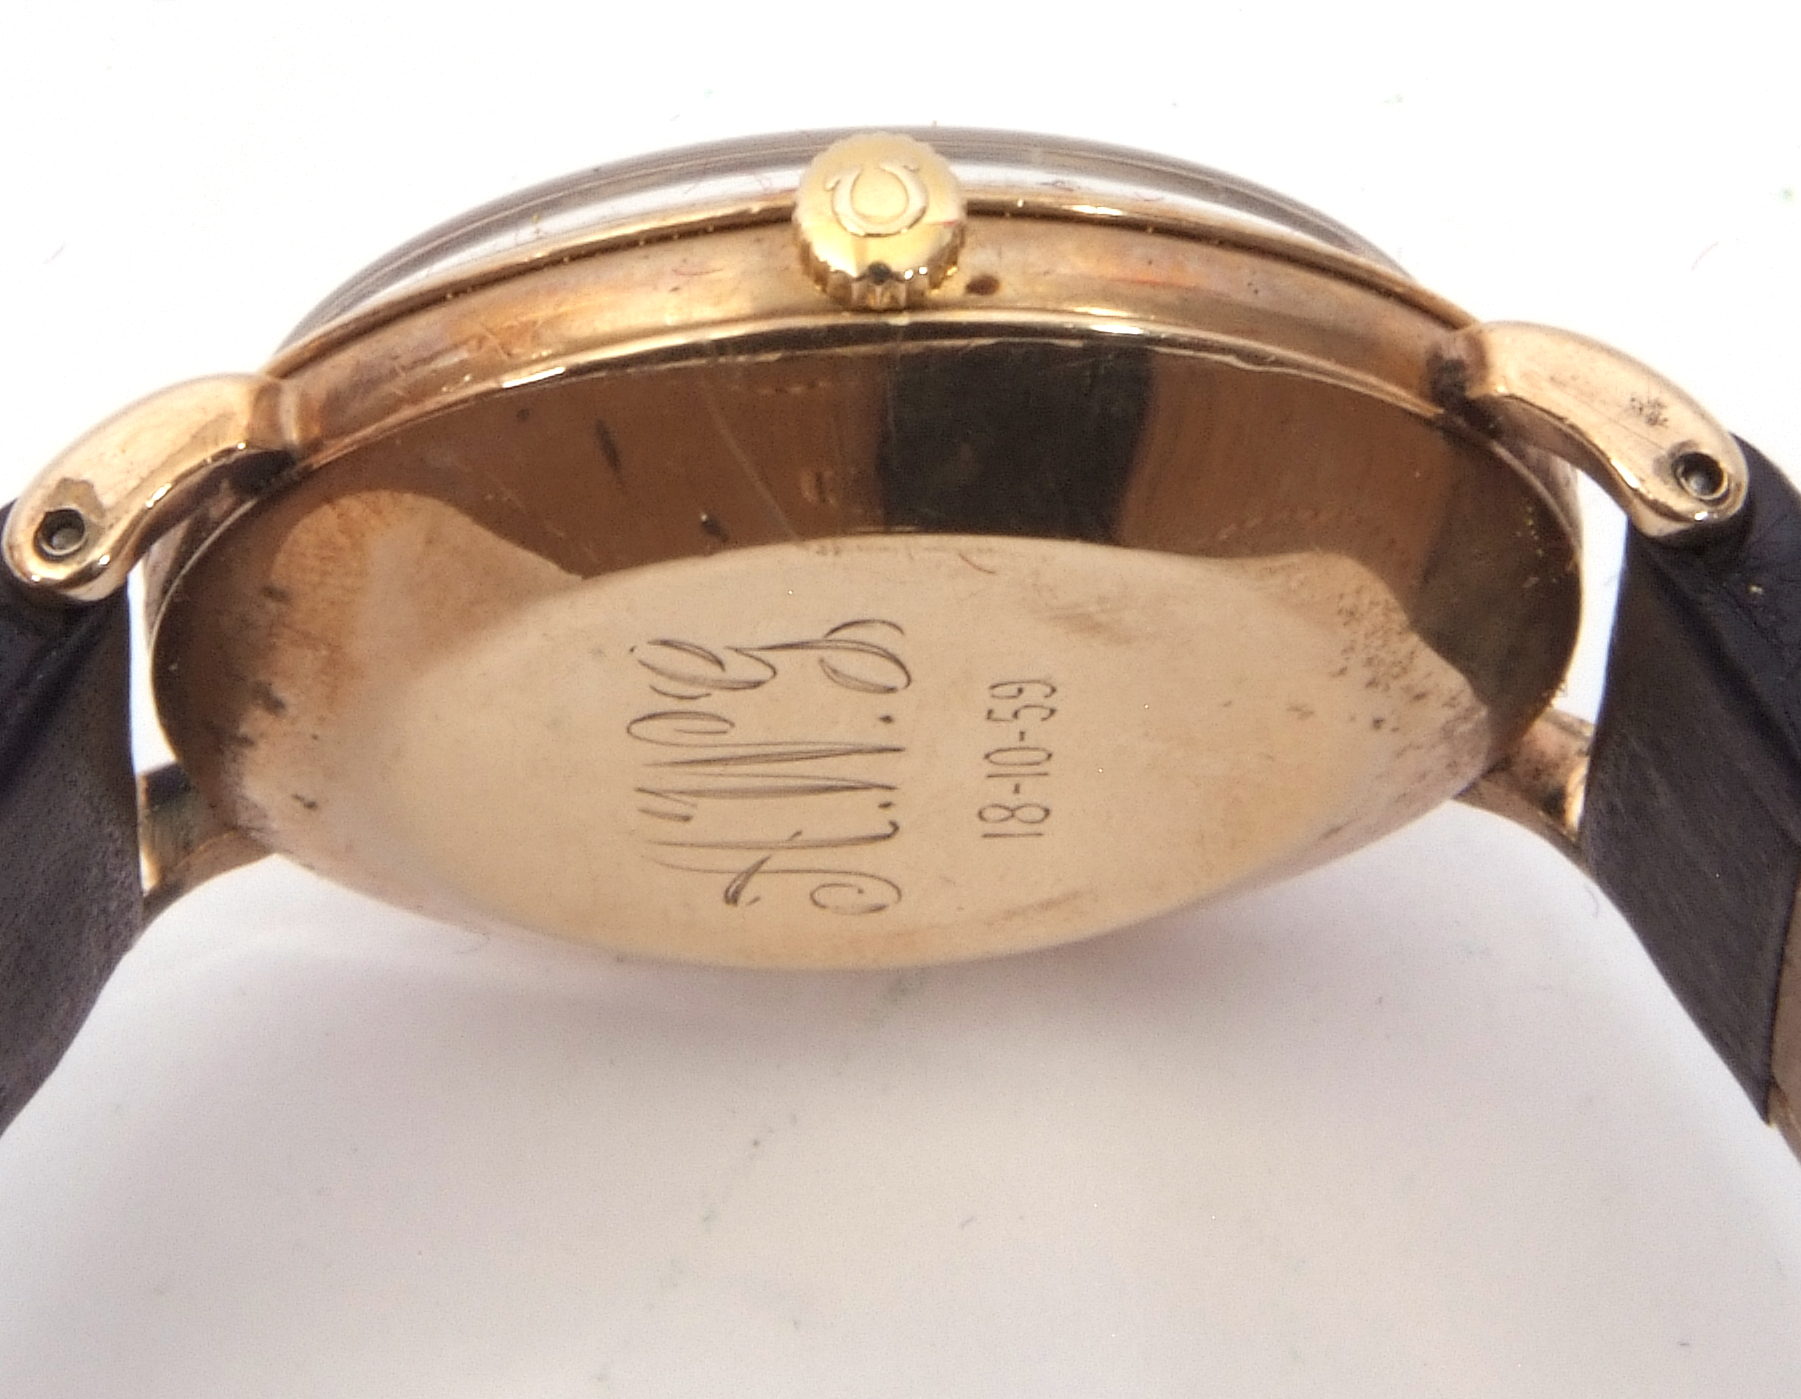 Third quarter of the 20th century gents Omega 9ct gold cased automatic movement wrist watch, with - Image 8 of 14